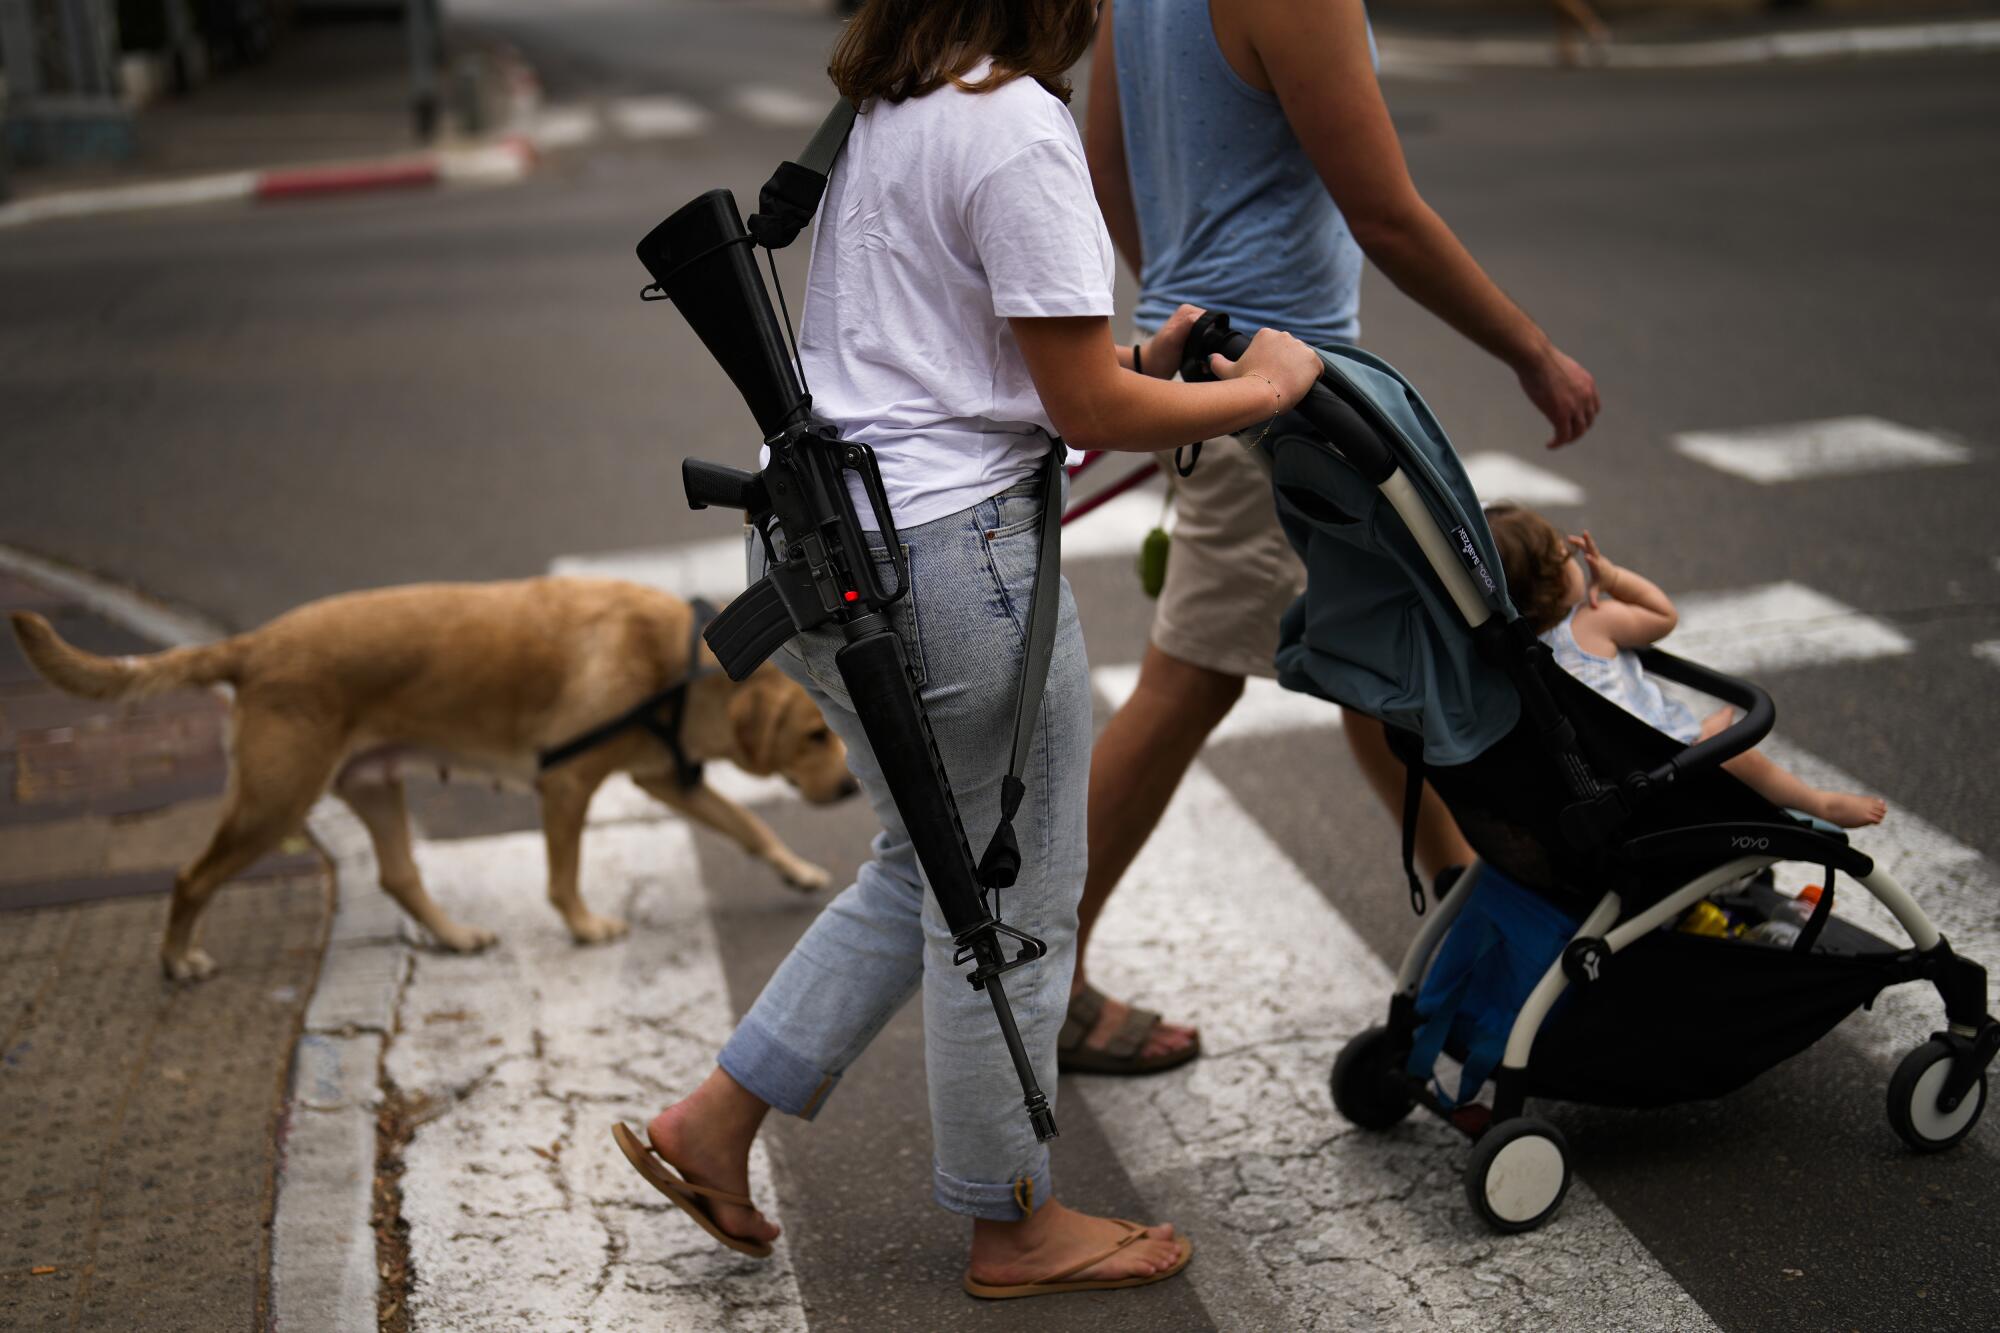 Off-duty Israeli soldier with firearm slung over her shoulder as she pushes a stroller